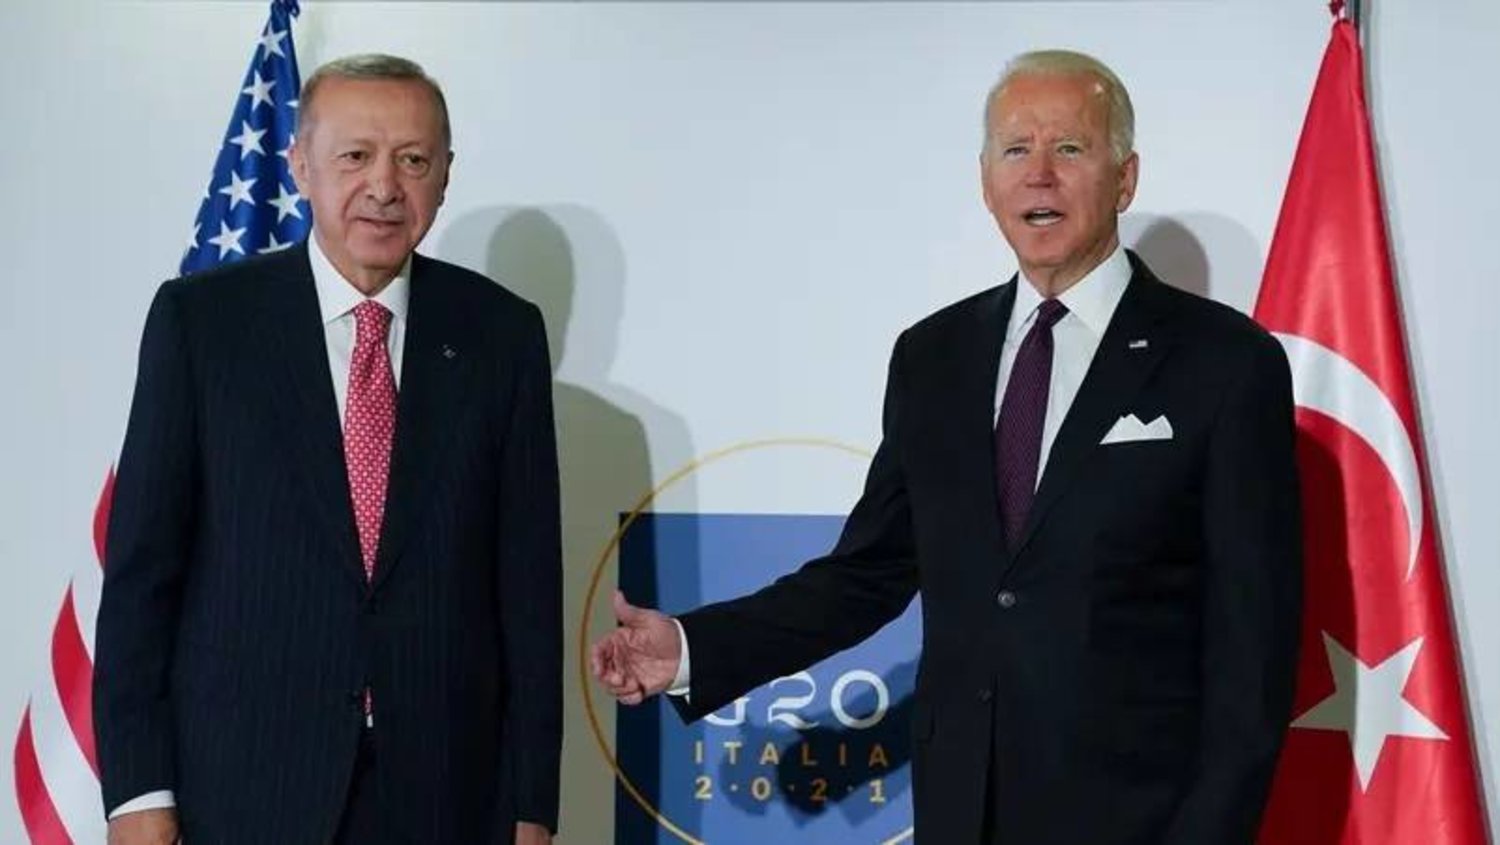 US President Joe Biden and Türkiye's President Tayyip Erdogan pose for a photo as they attend a bilateral meeting, on the sidelines of the G20 leaders' summit in Rome, Italy October 31, 2021. (File photo: Reuters)
